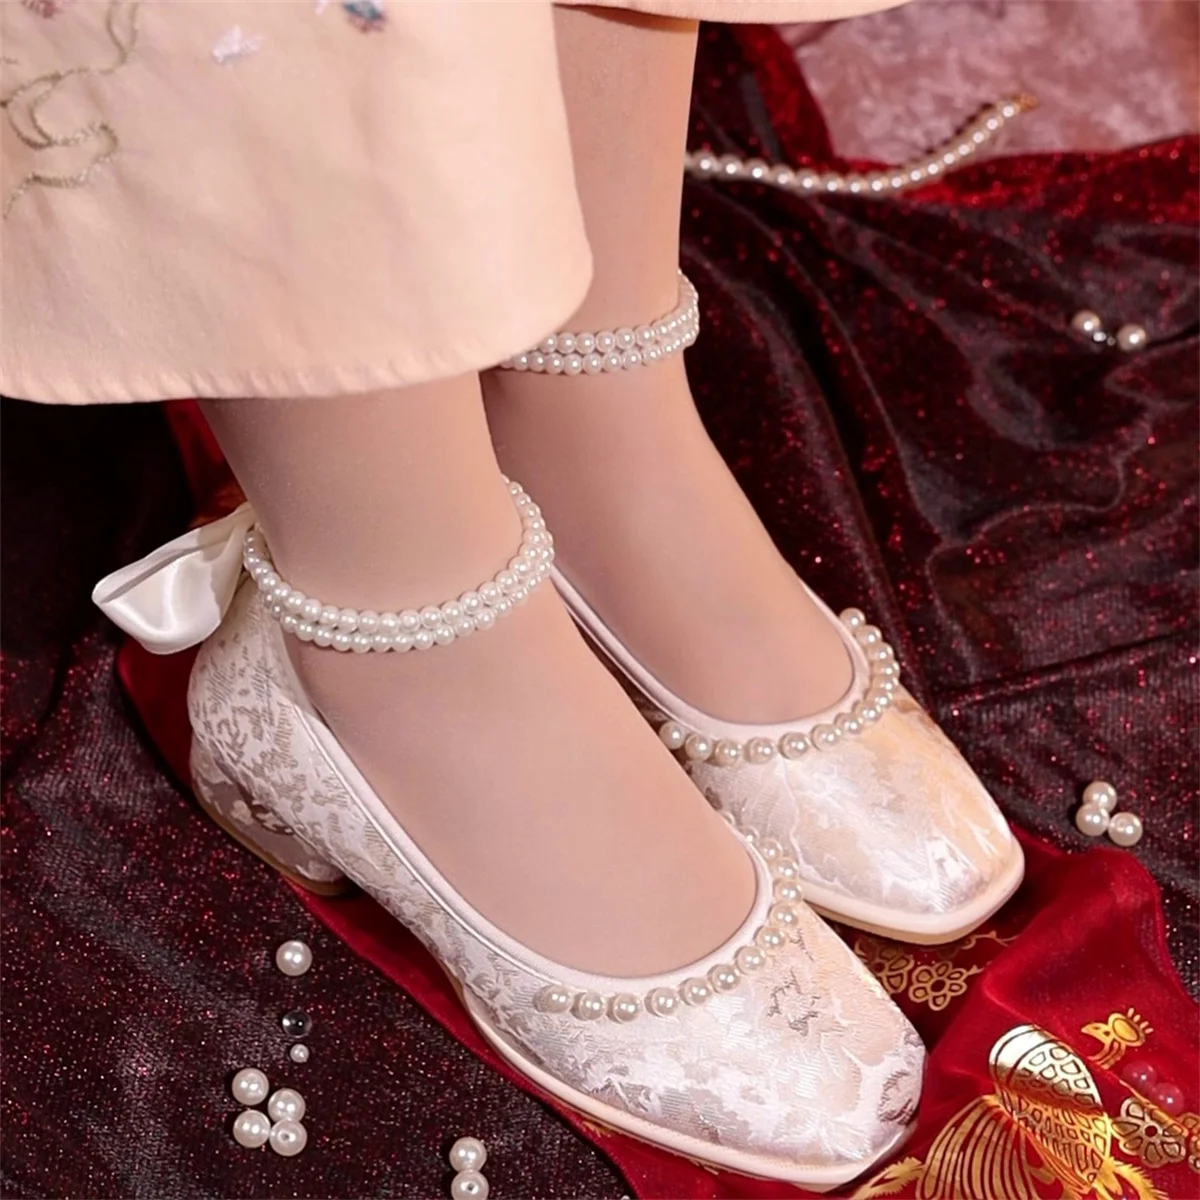 

Chinese Vintage Style Cosplay Cheongsam Girls Shoes Elegant Flower Pearls Lace Ruffle Ribbon Bowknot Square Head 2.5cm Shoes